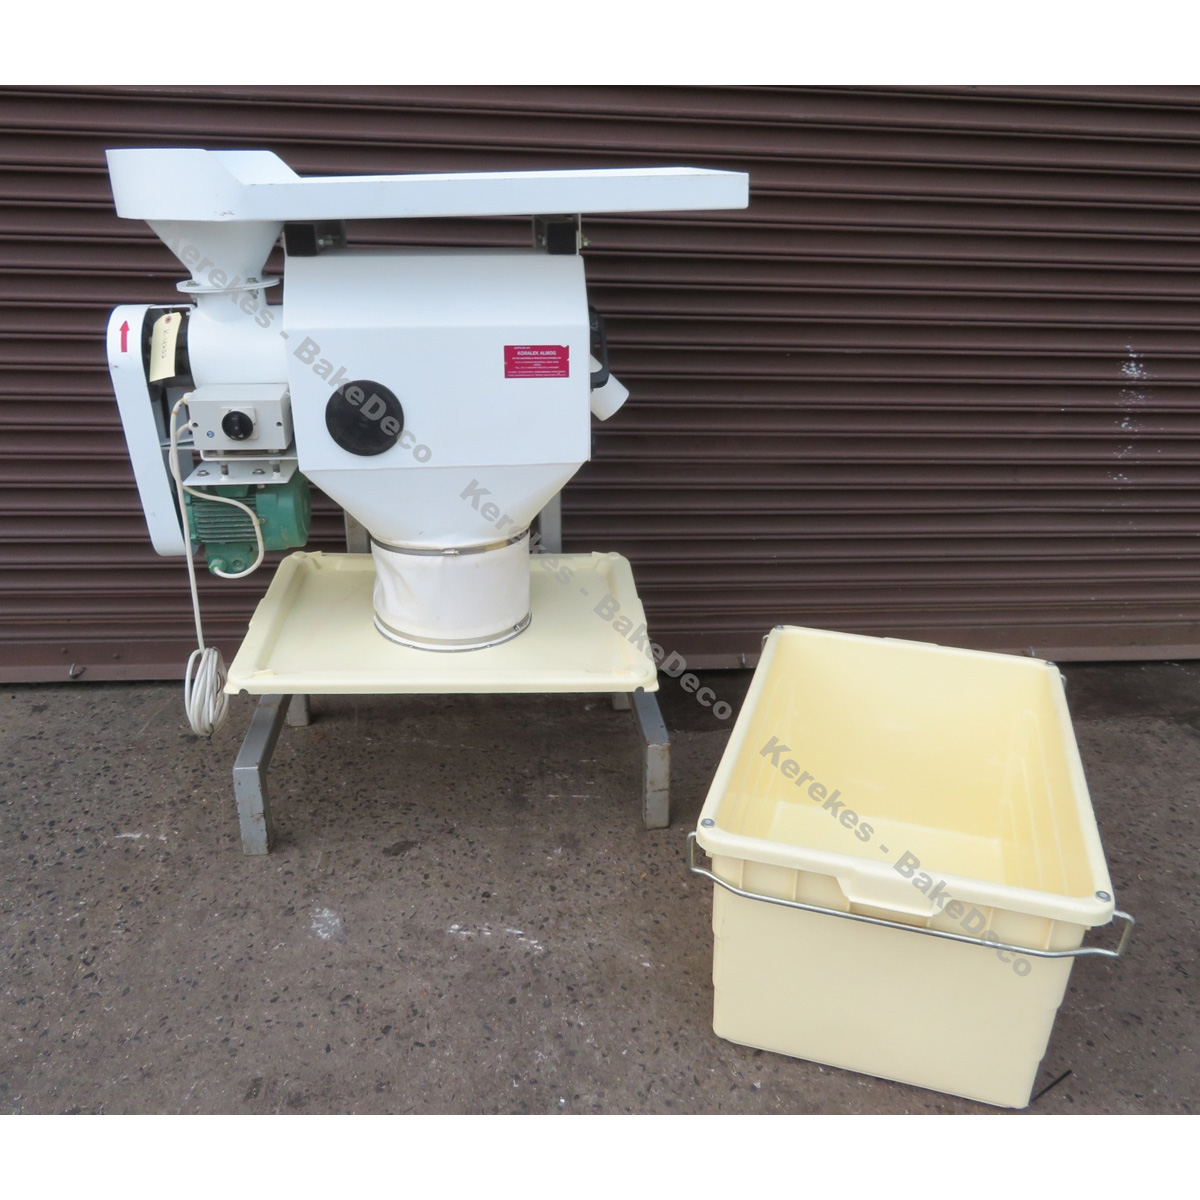 Koralek-Almog Commercial 50 Mesh Flour Sifter GLZ 200X500, Used Excellent Condition image 5